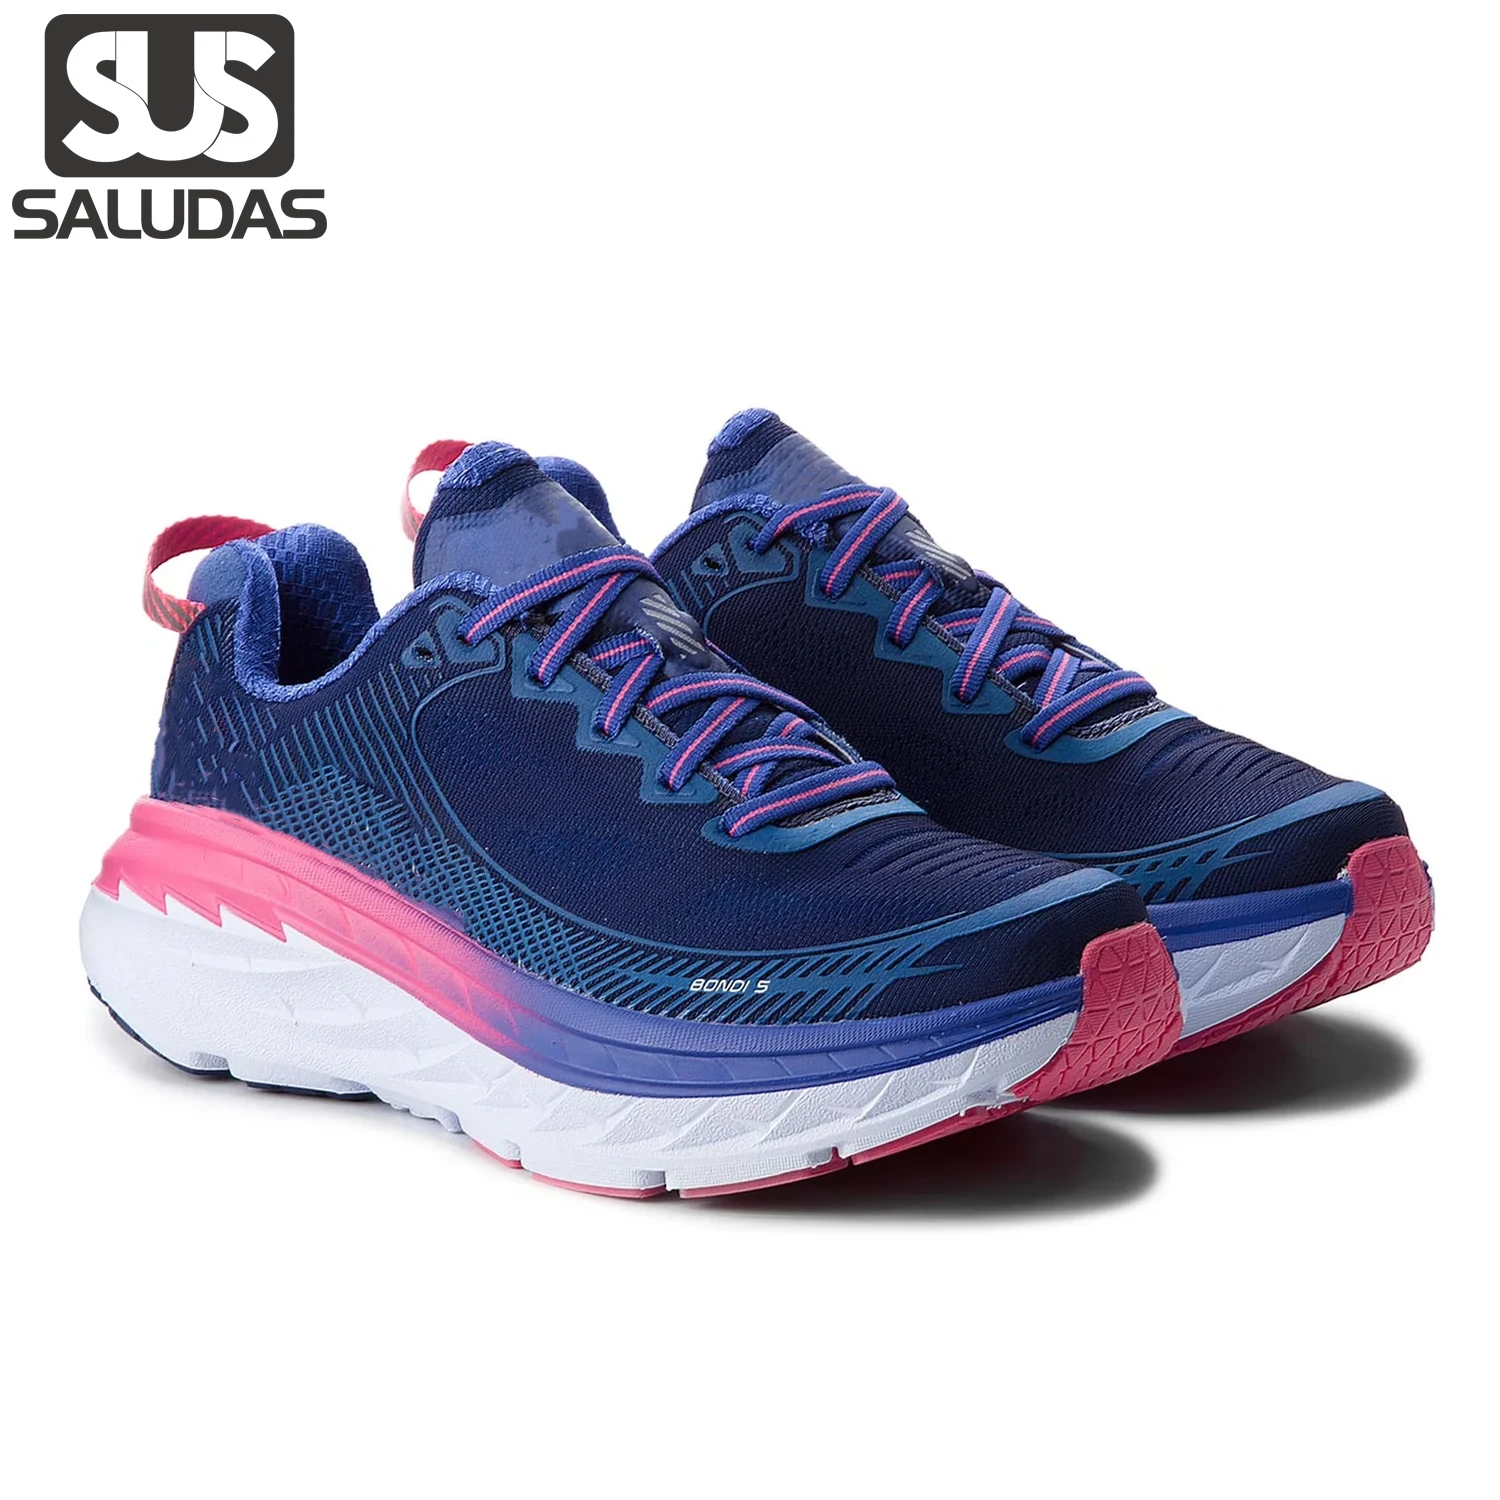 

SALUDAS Bondi 5 Women Shoes Men Running Shoes Thick Sole Cushioning Soft Sole Outdoor Unisex Casual Road Jogging Sneakers